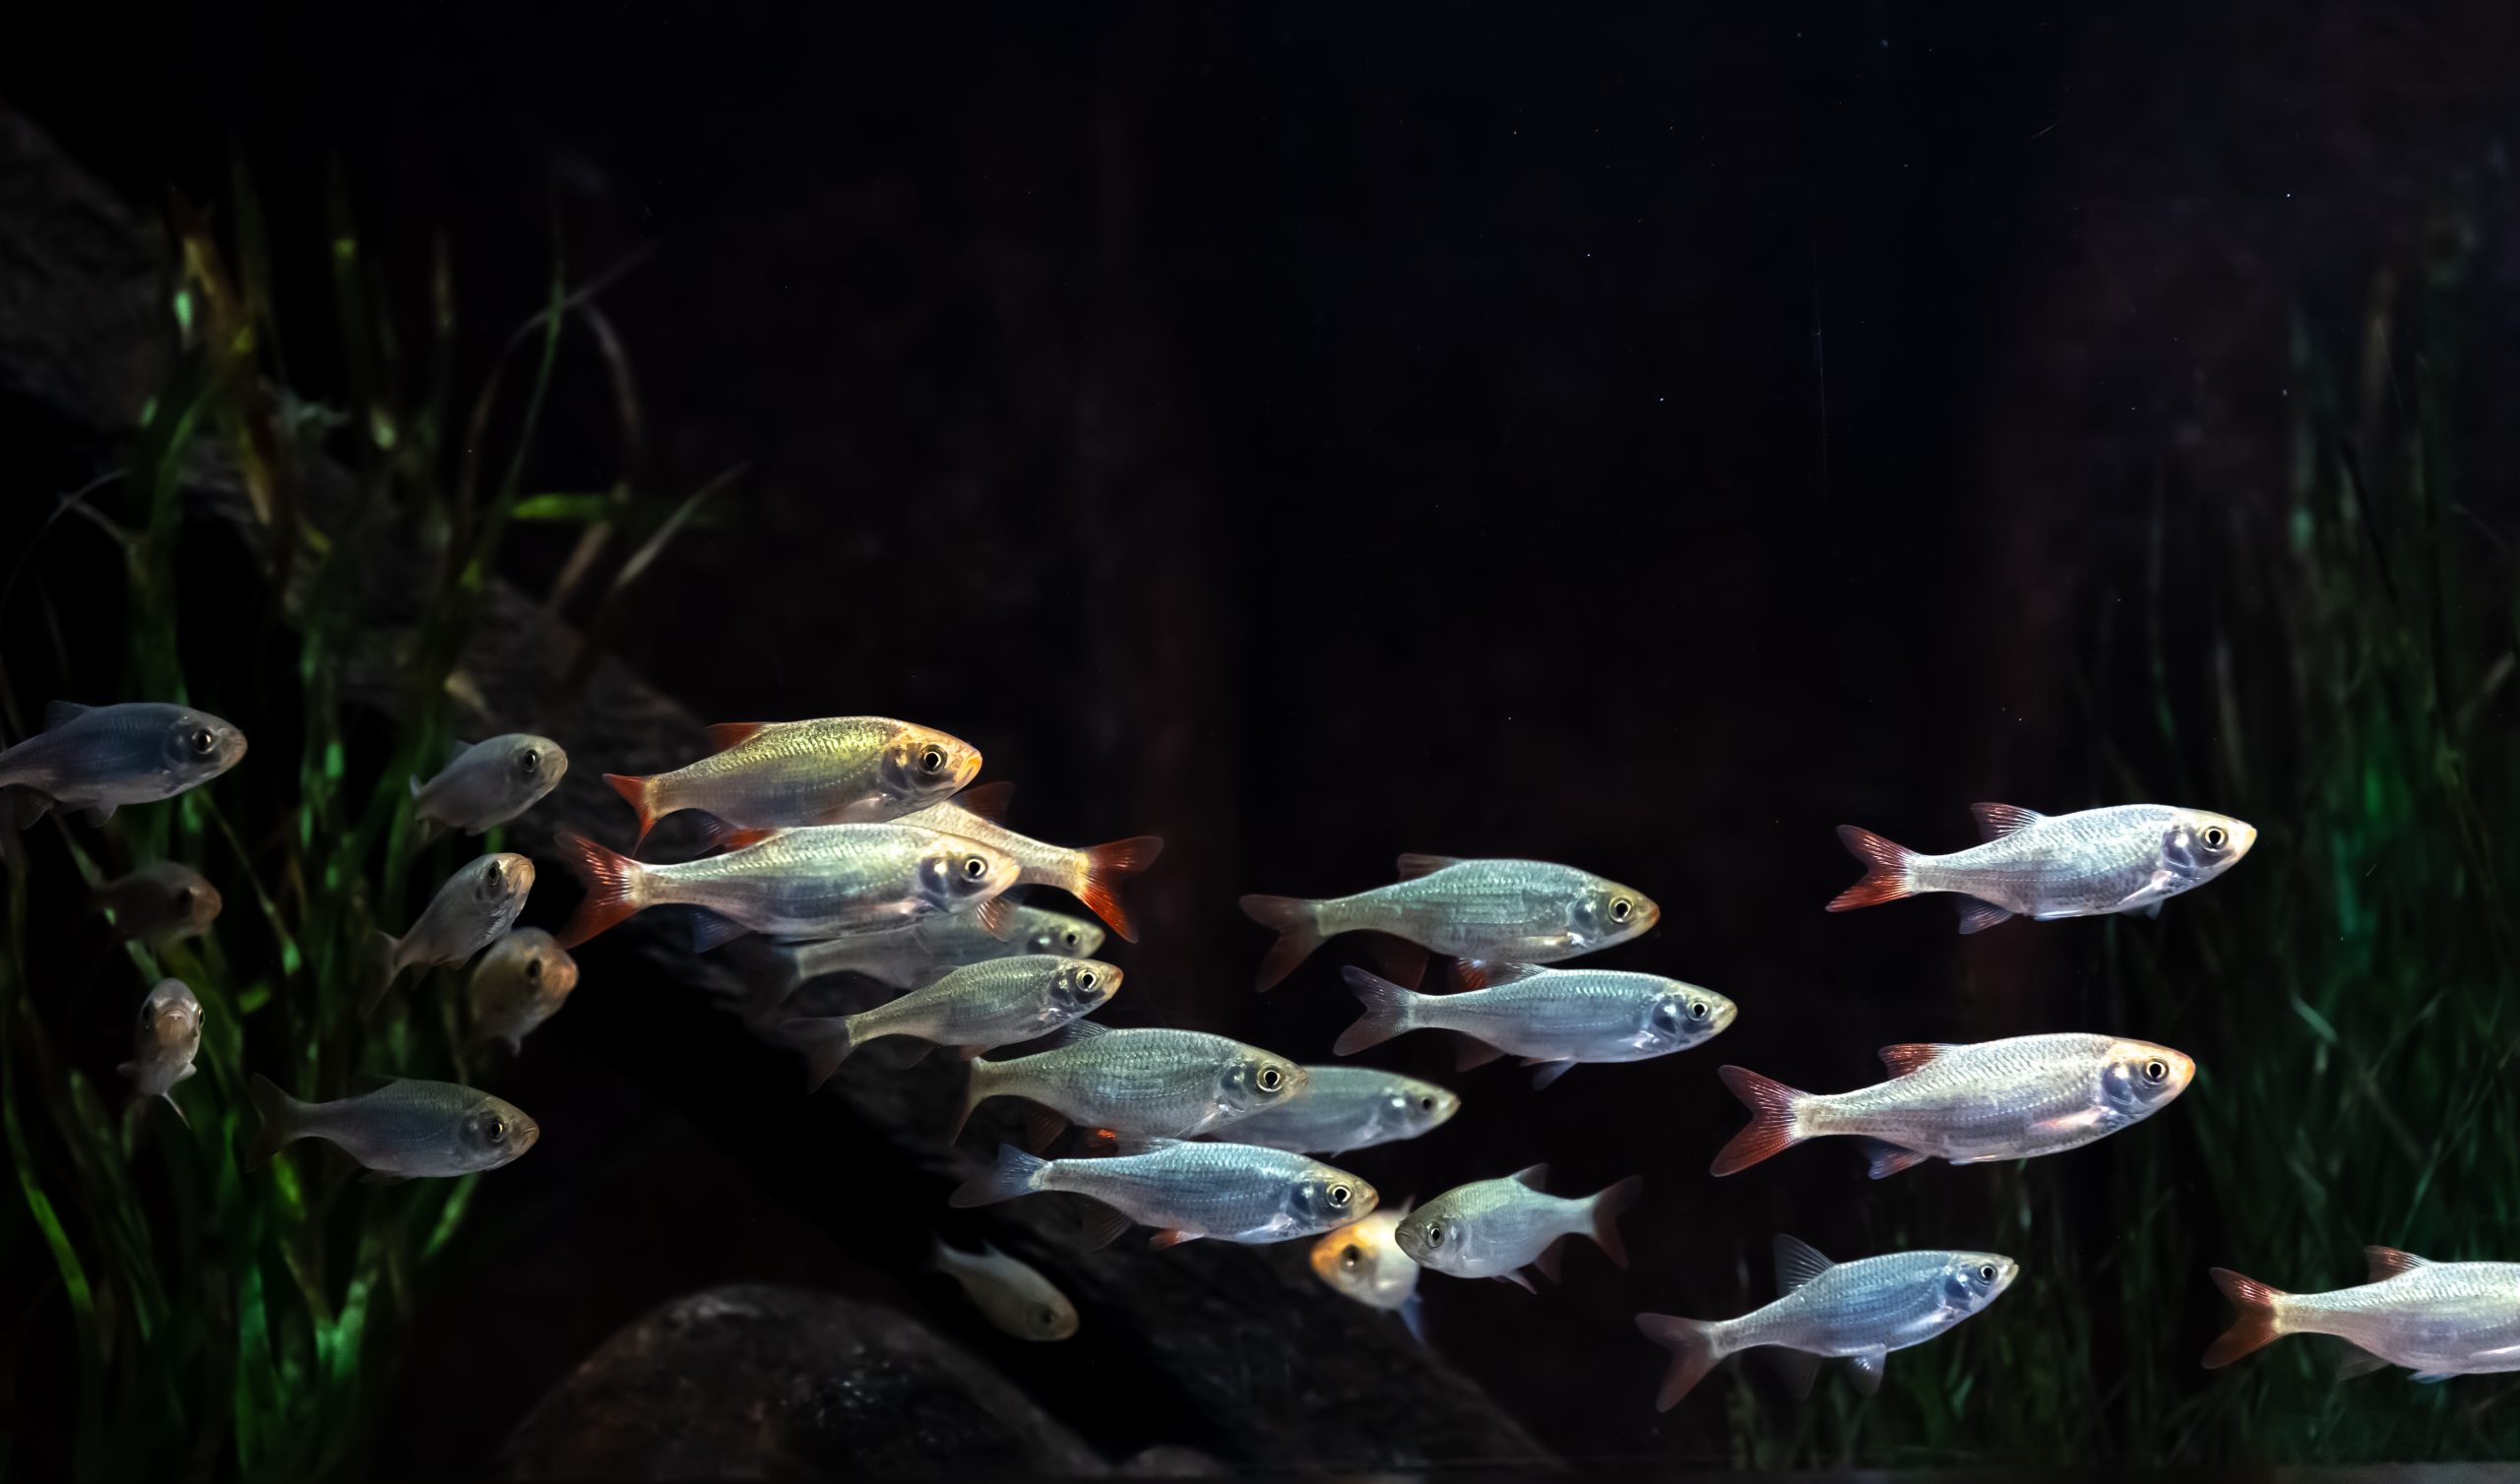 Small silver fish in an aquarium on a black background.